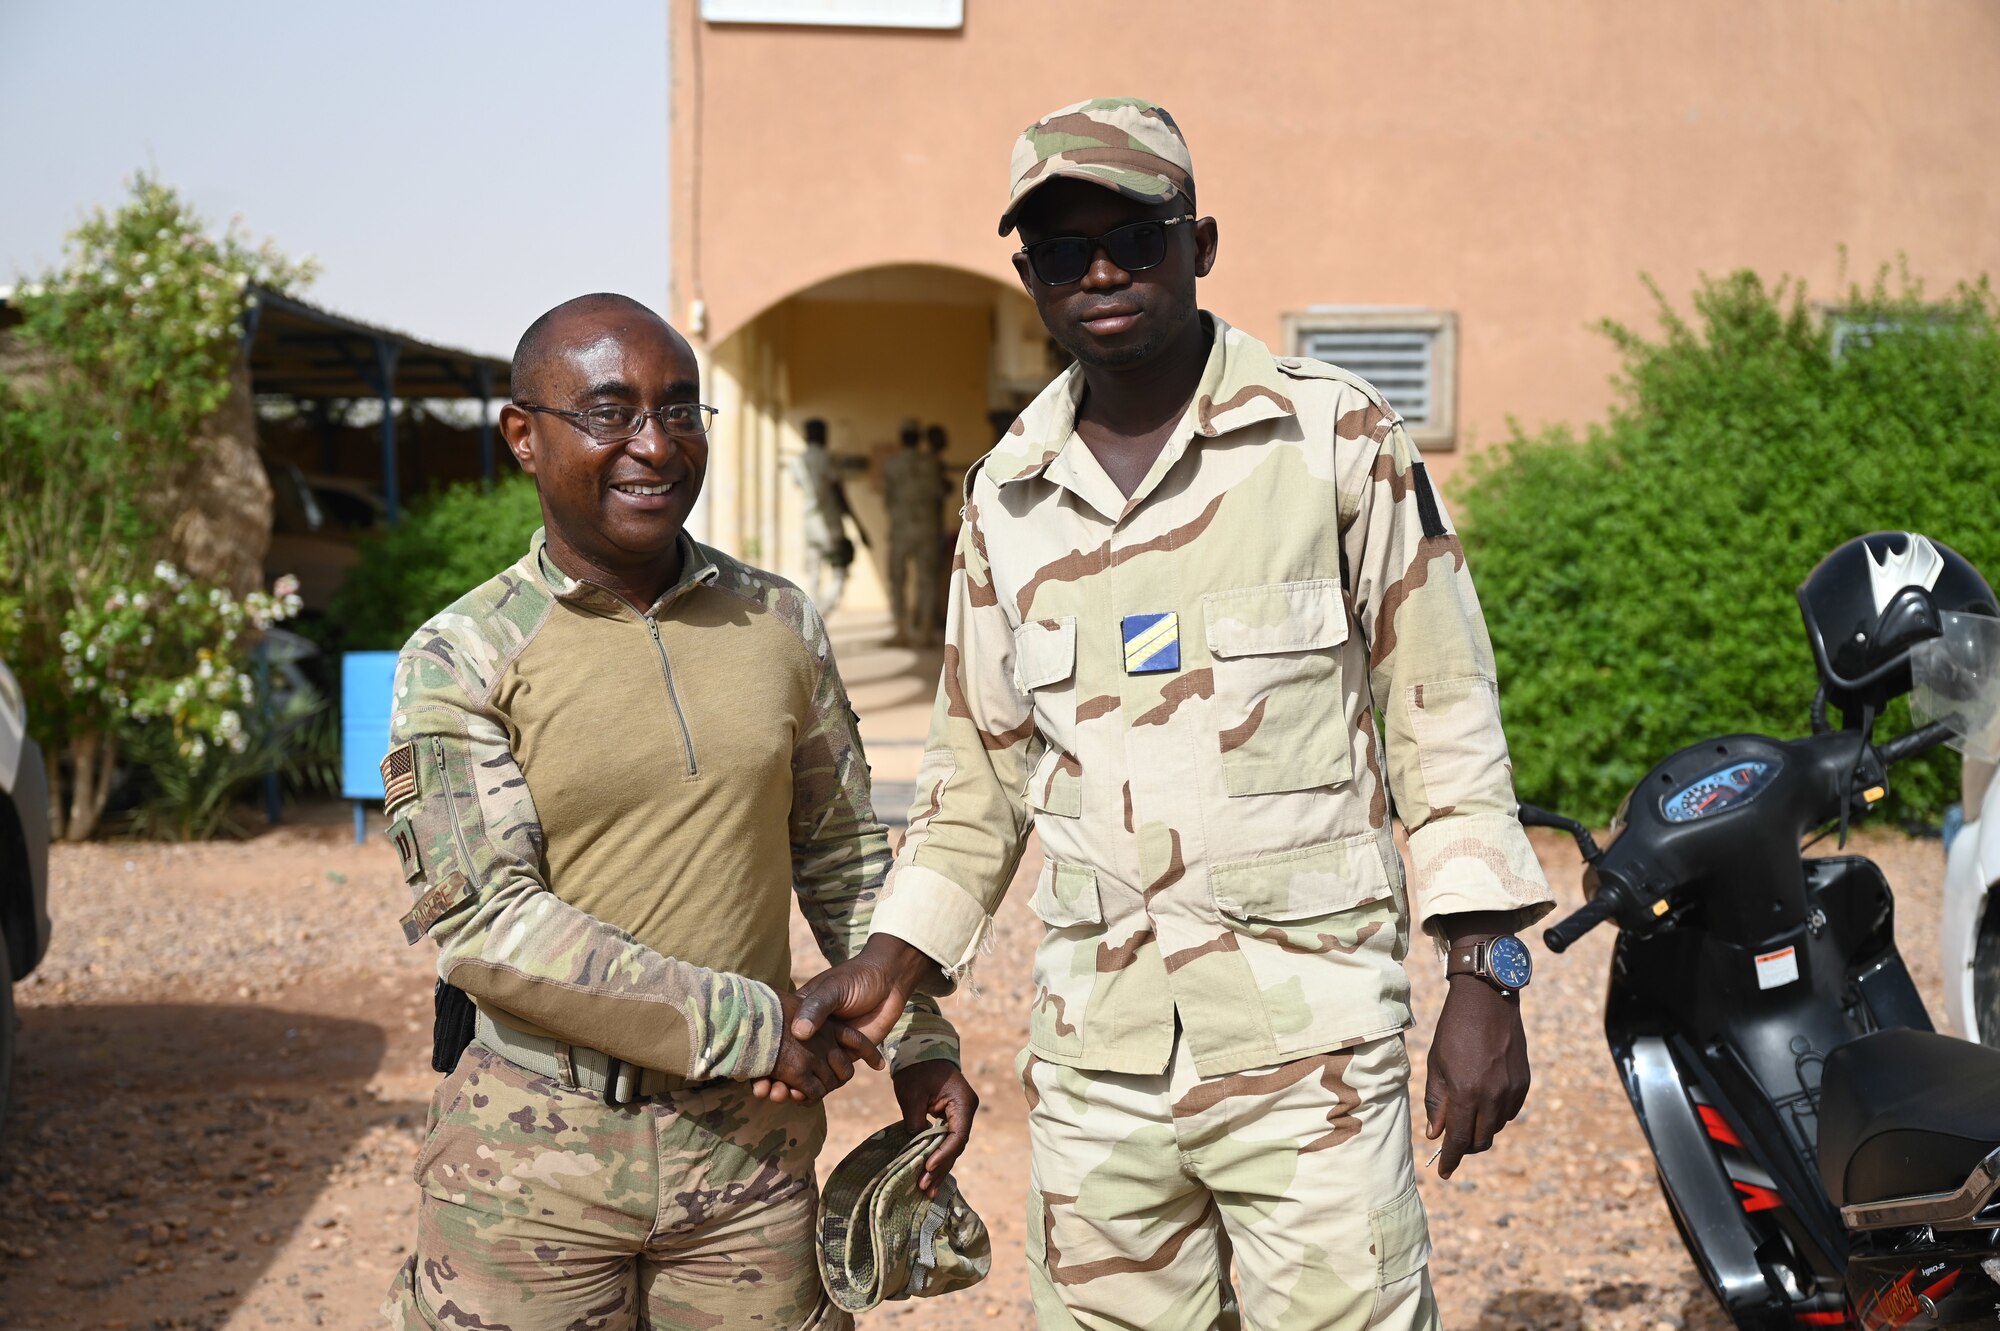 U.S. Air Force Capt. Guy Kagere, 435th Air Expeditionary Wing chaplain, poses for a photo with Nigerien Armed Forces Sergeant Souleman, FAN chaplain at Nigerien Air Base 201, Agadez, July 8, 2021.